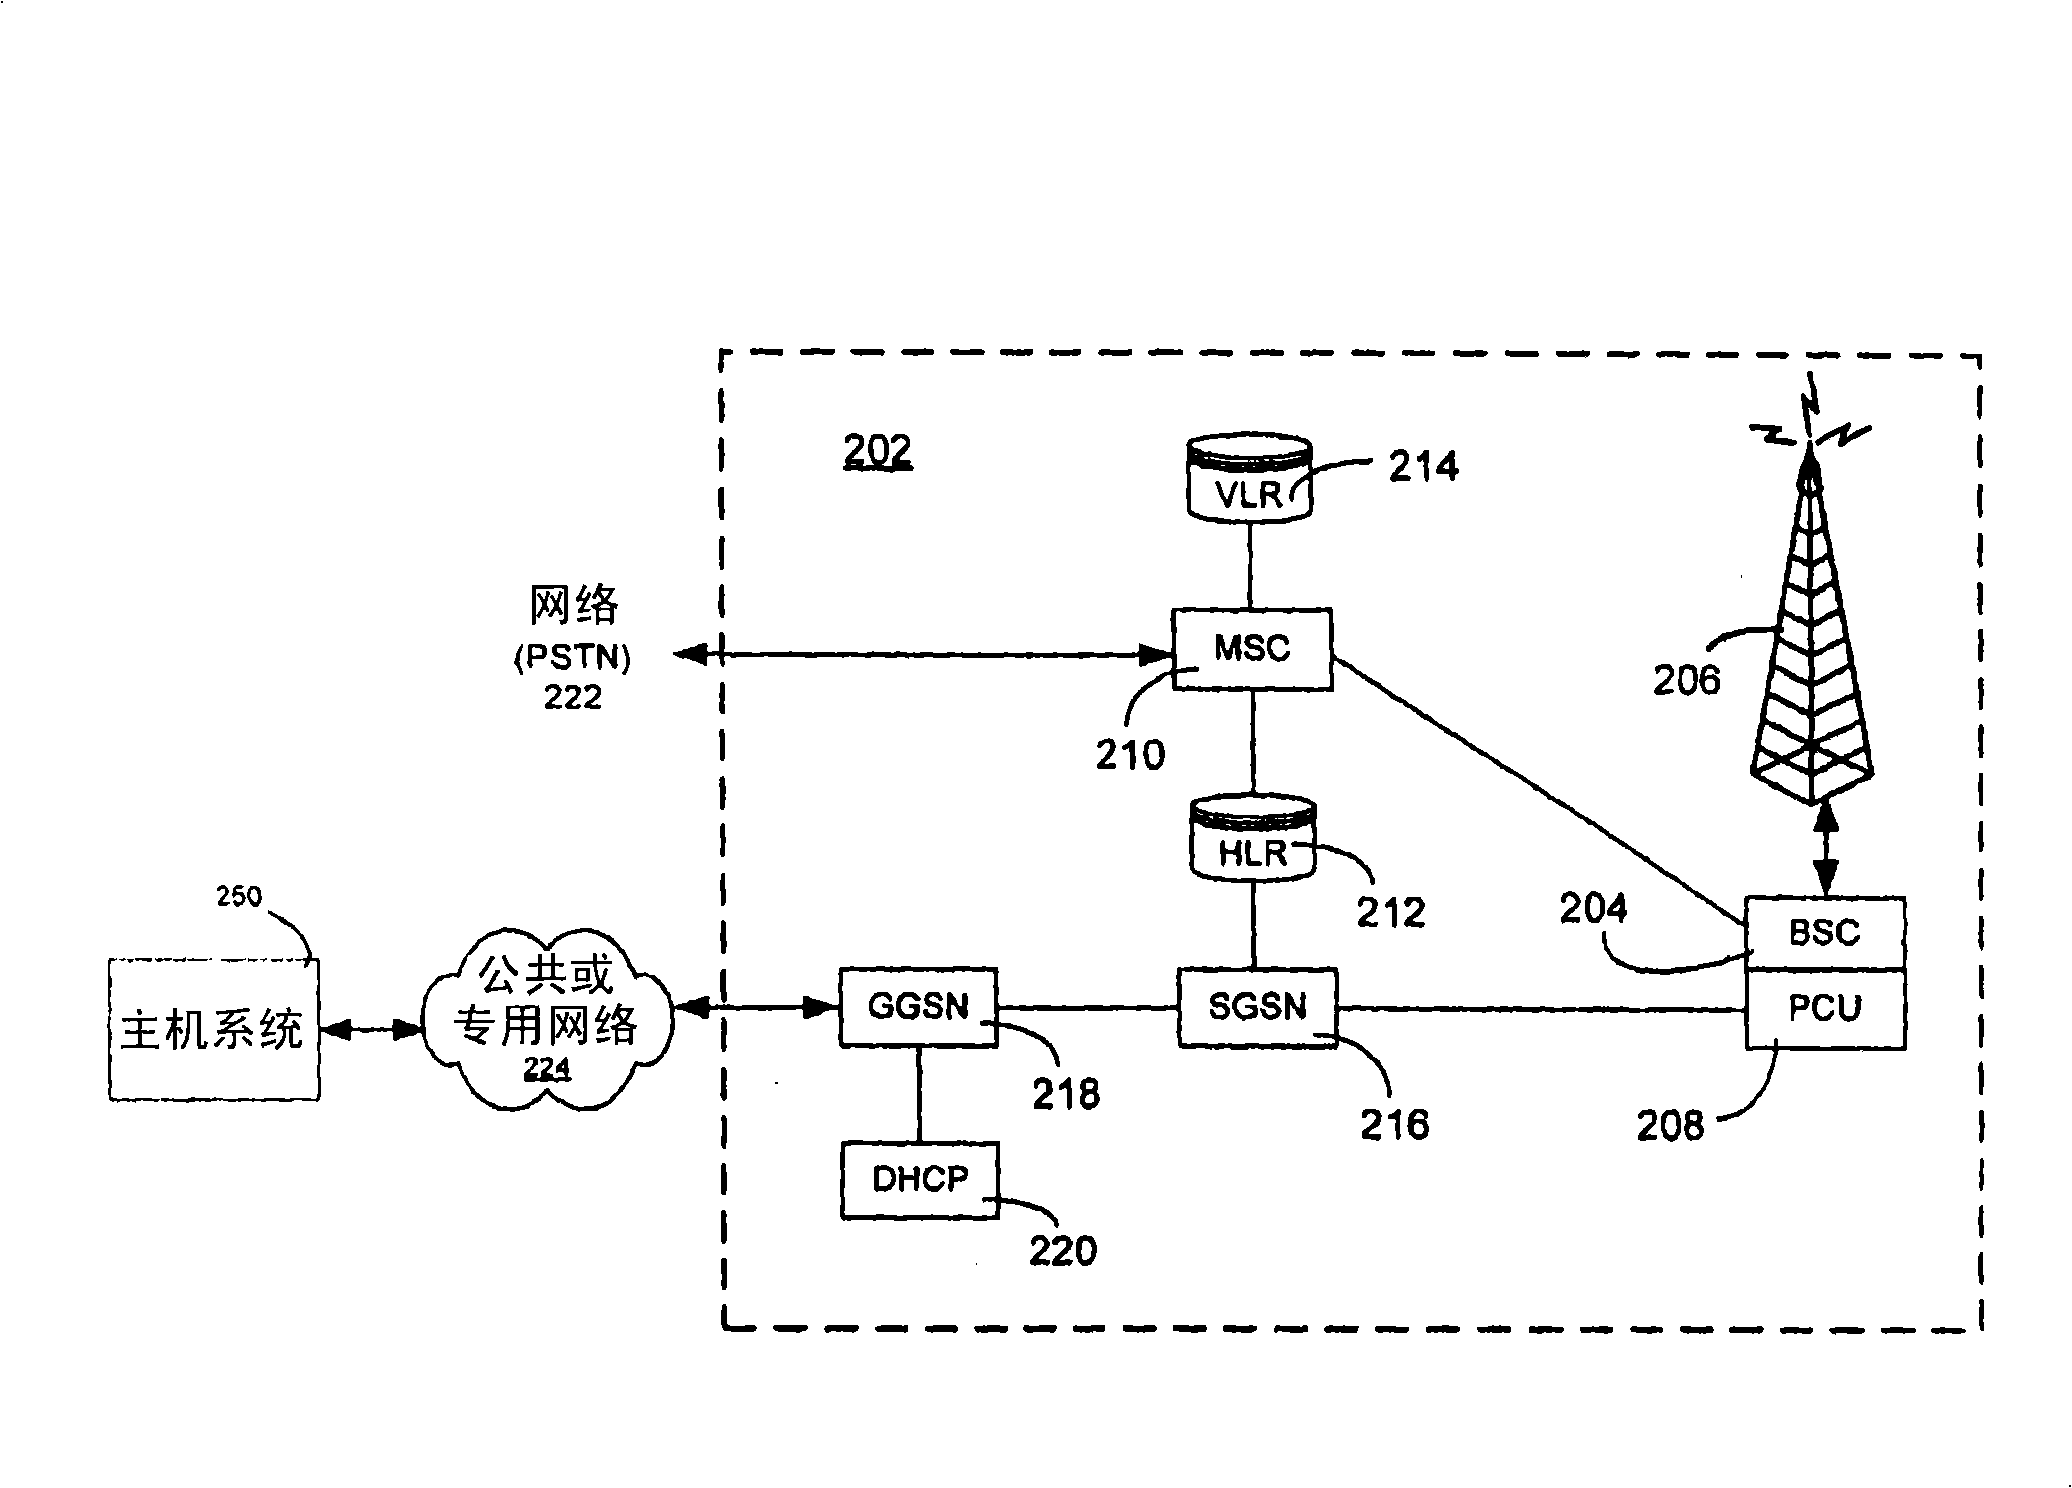 Battery pack authentication for a mobile device